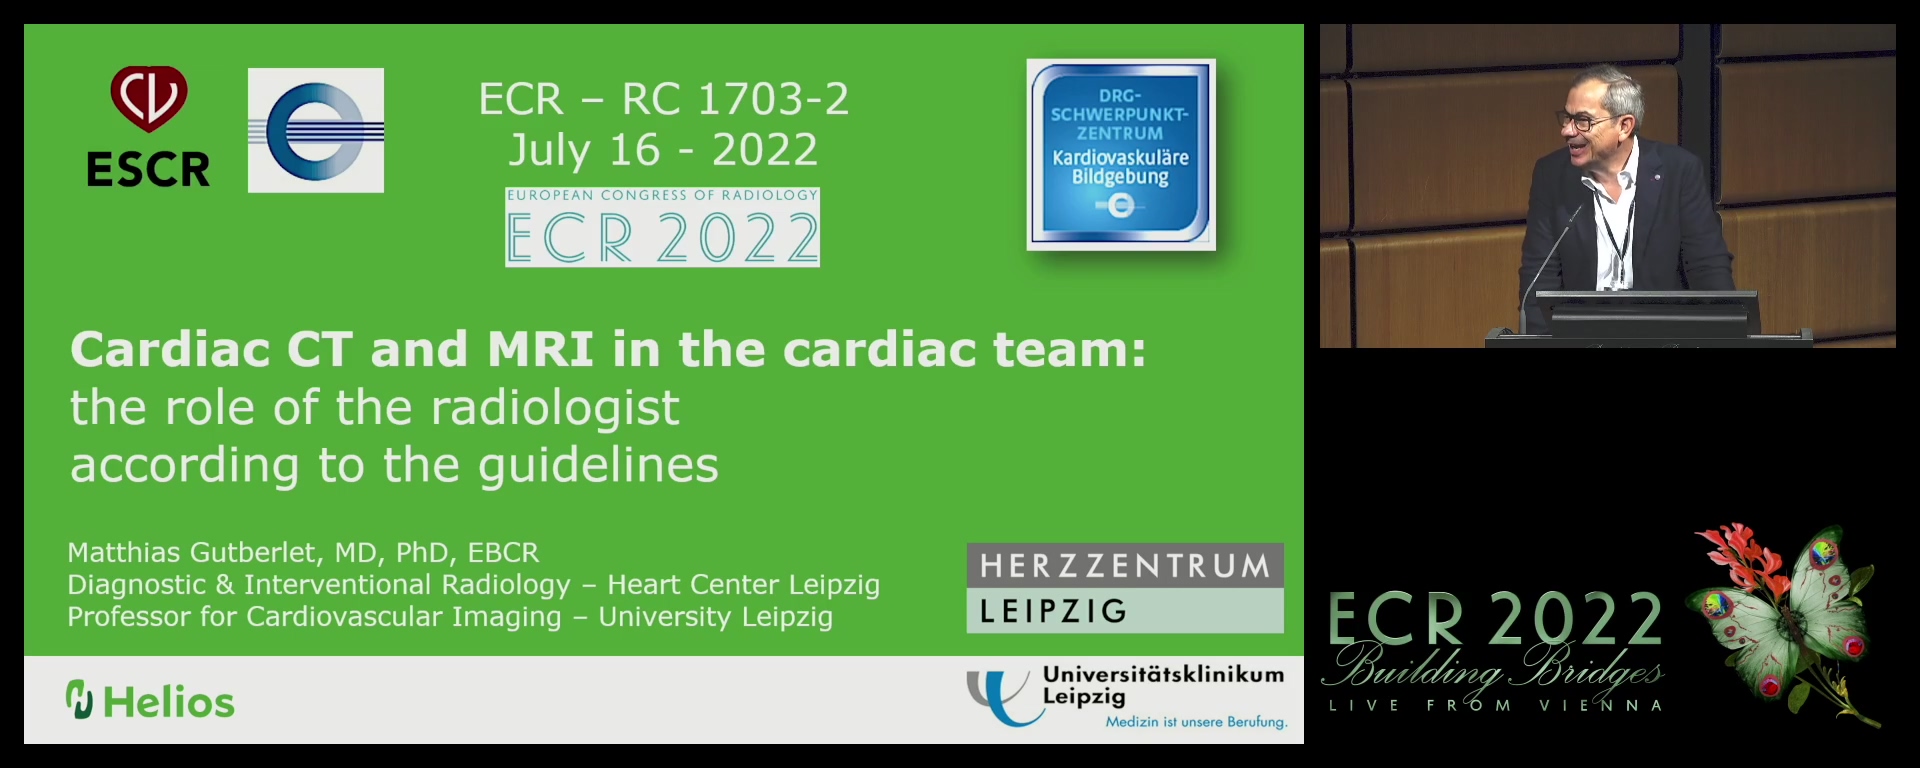 Cardiac CT and MRI in the cardiac team: the role of the radiologist according to the guidelines